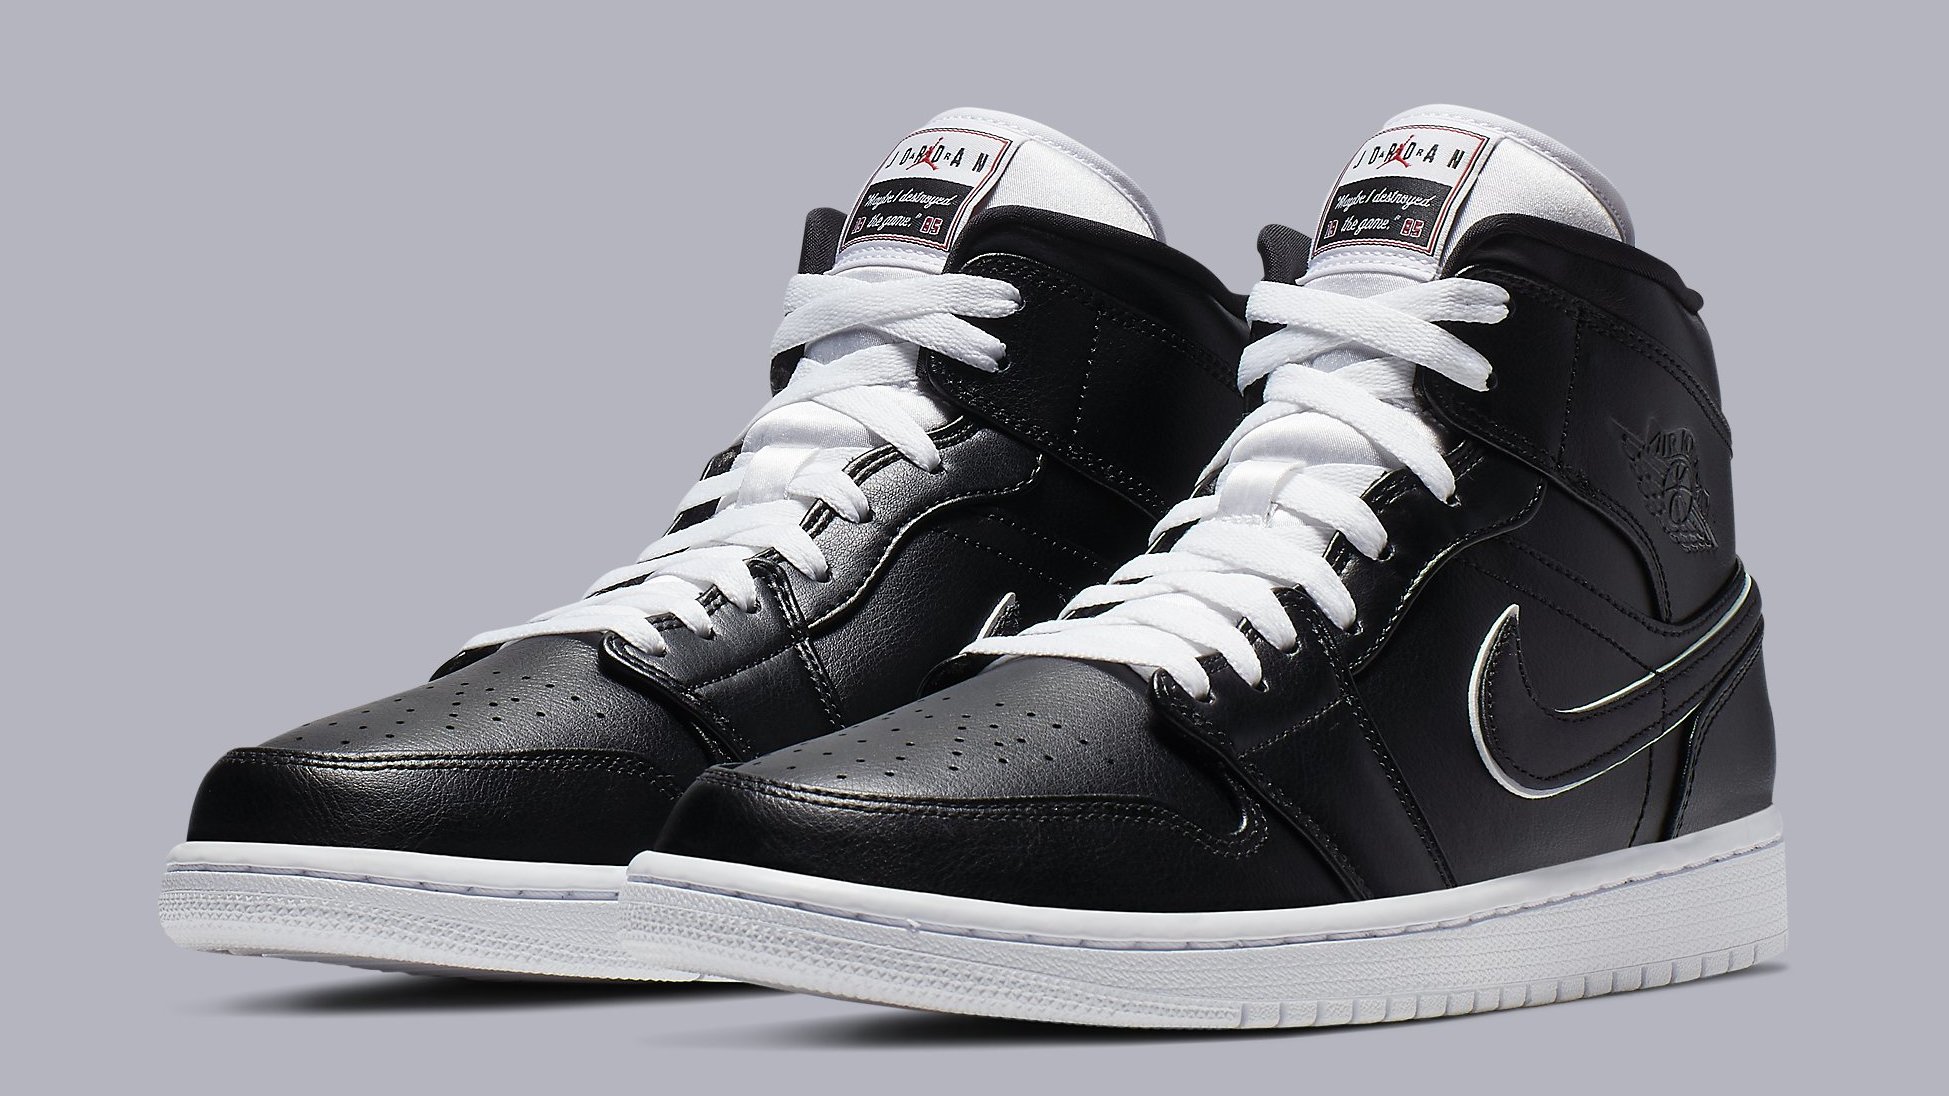 Air Jordan 1 Retro Mid 'Maybe I Destroyed the Game' Release Date 852542-016  | Sole Collector